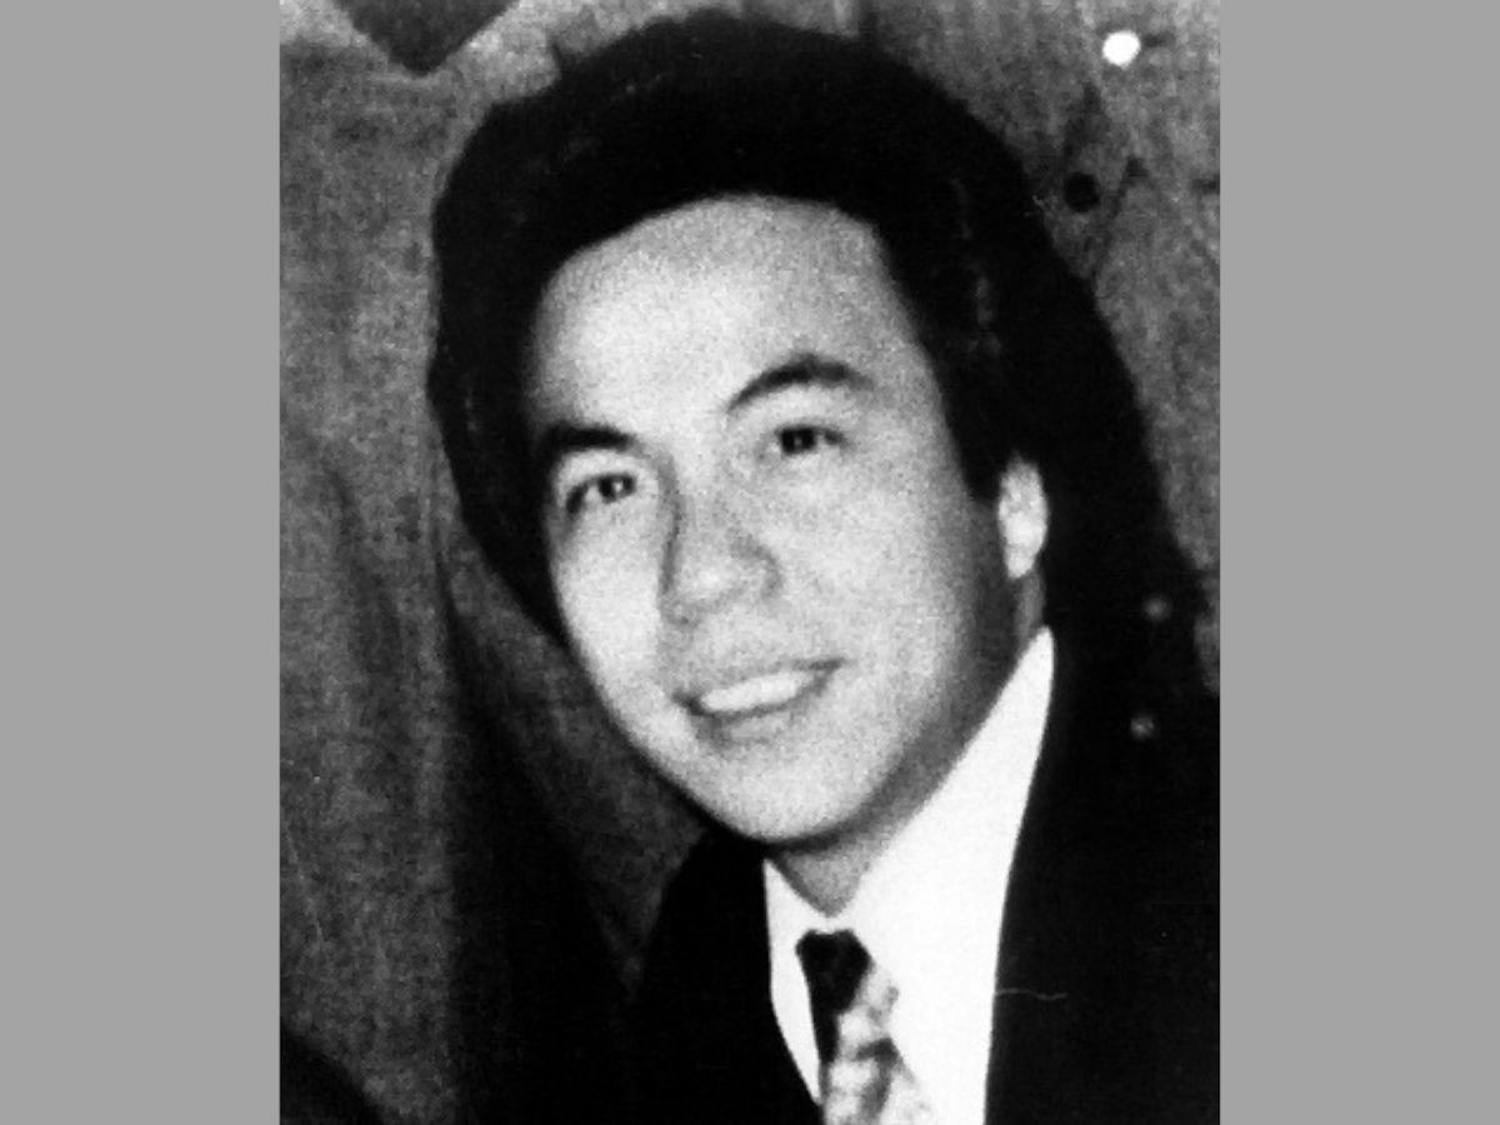 In 1982, 27-year-old Vincent Chin was beaten and killed in an attack that was allegedly racially motivated.